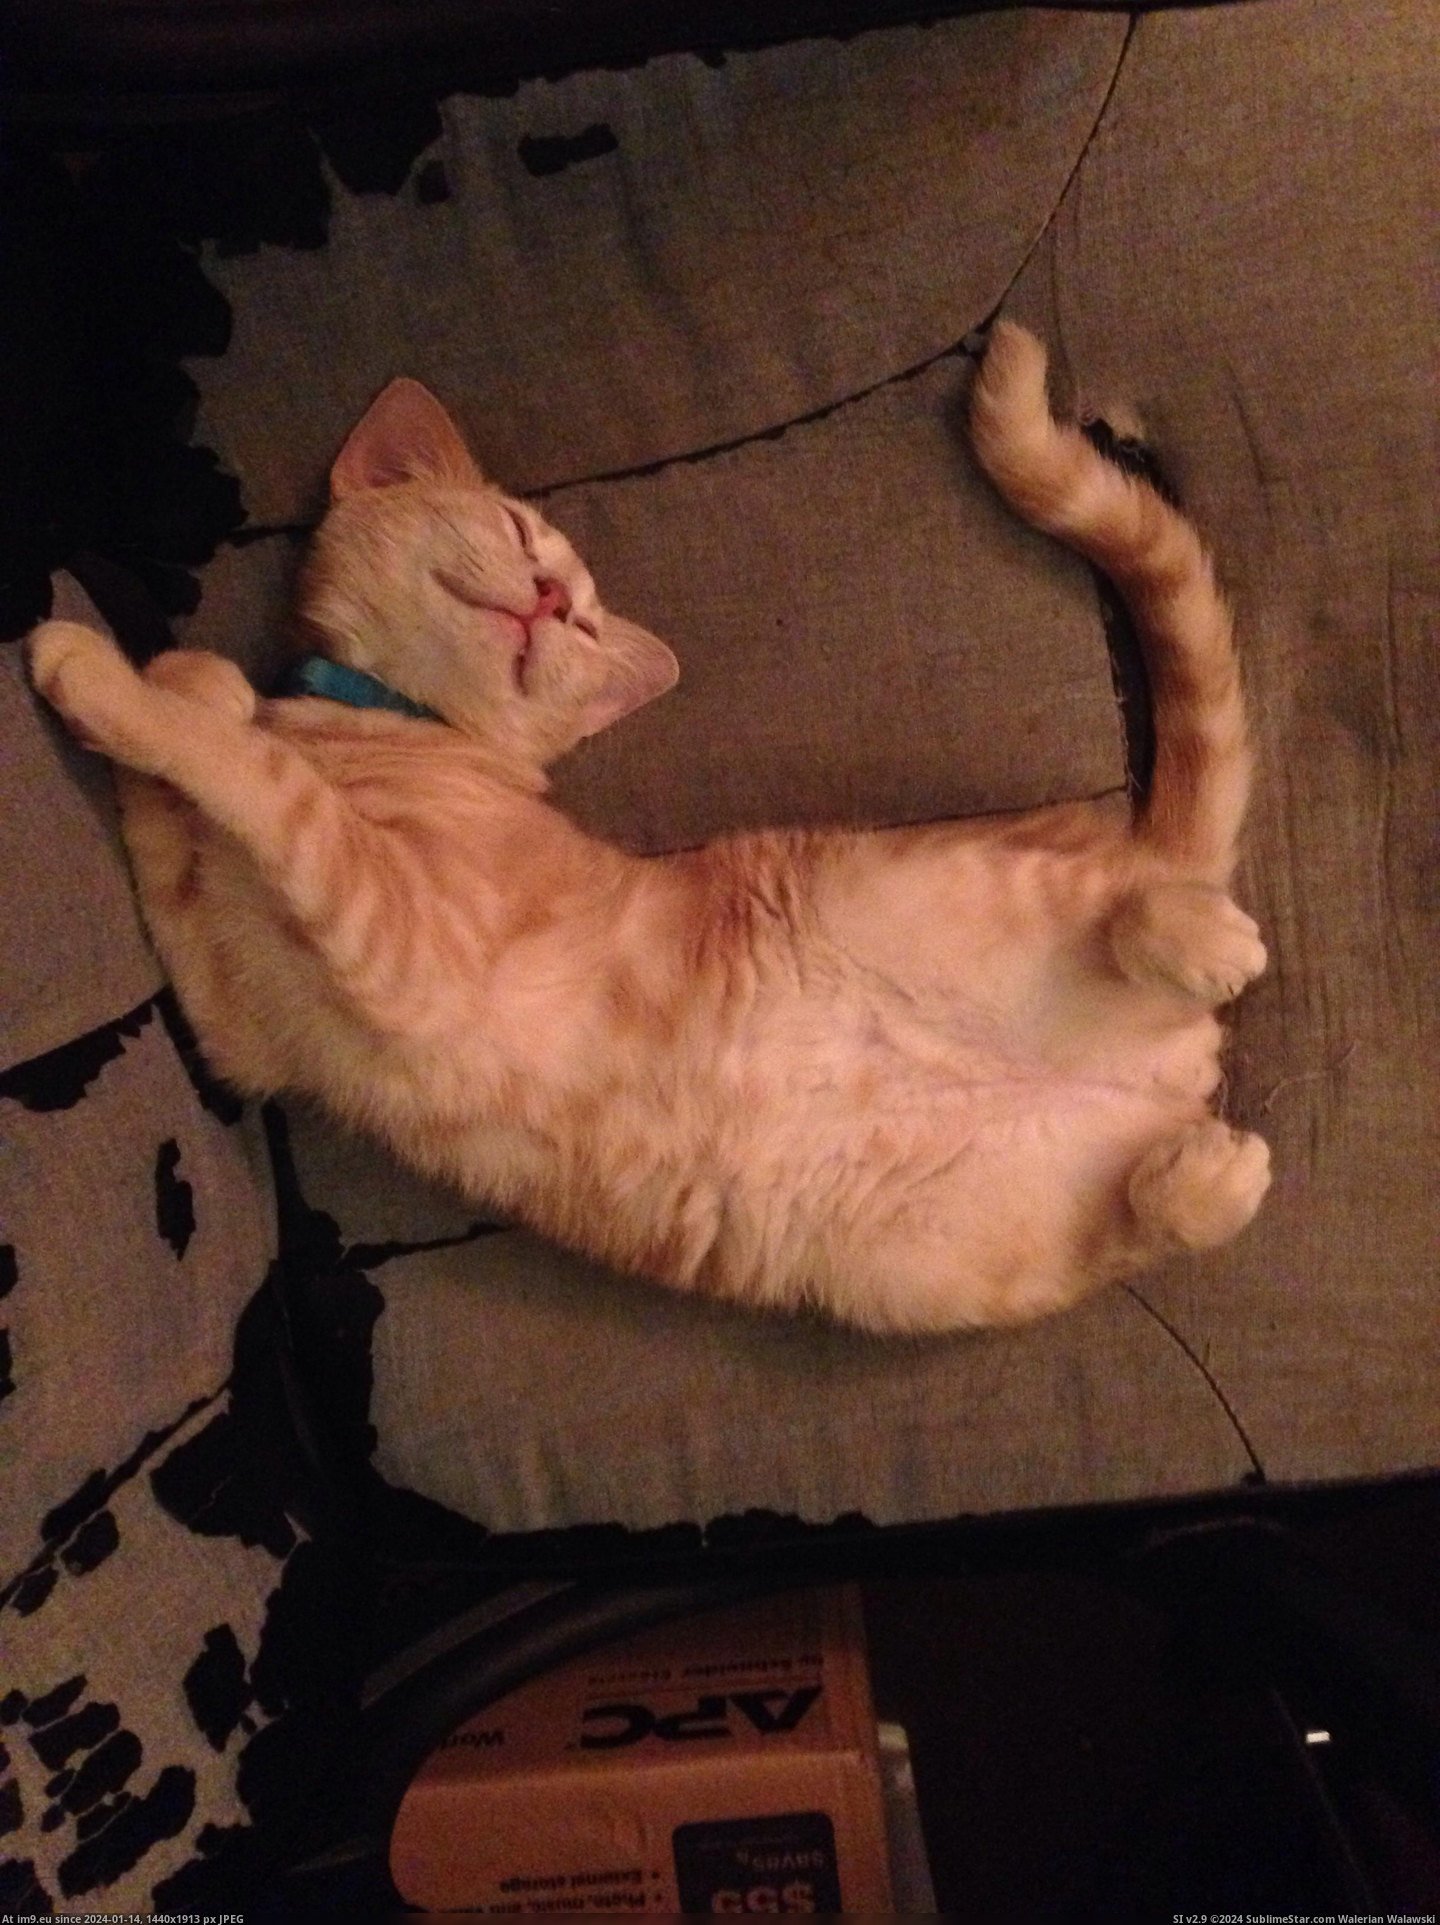 #Boy #How #Note #Curled #Toes #Our #Sleeps [Aww] This is how our little boy sleeps. Note the curled toes. Pic. (Bild von album My r/AWW favs))